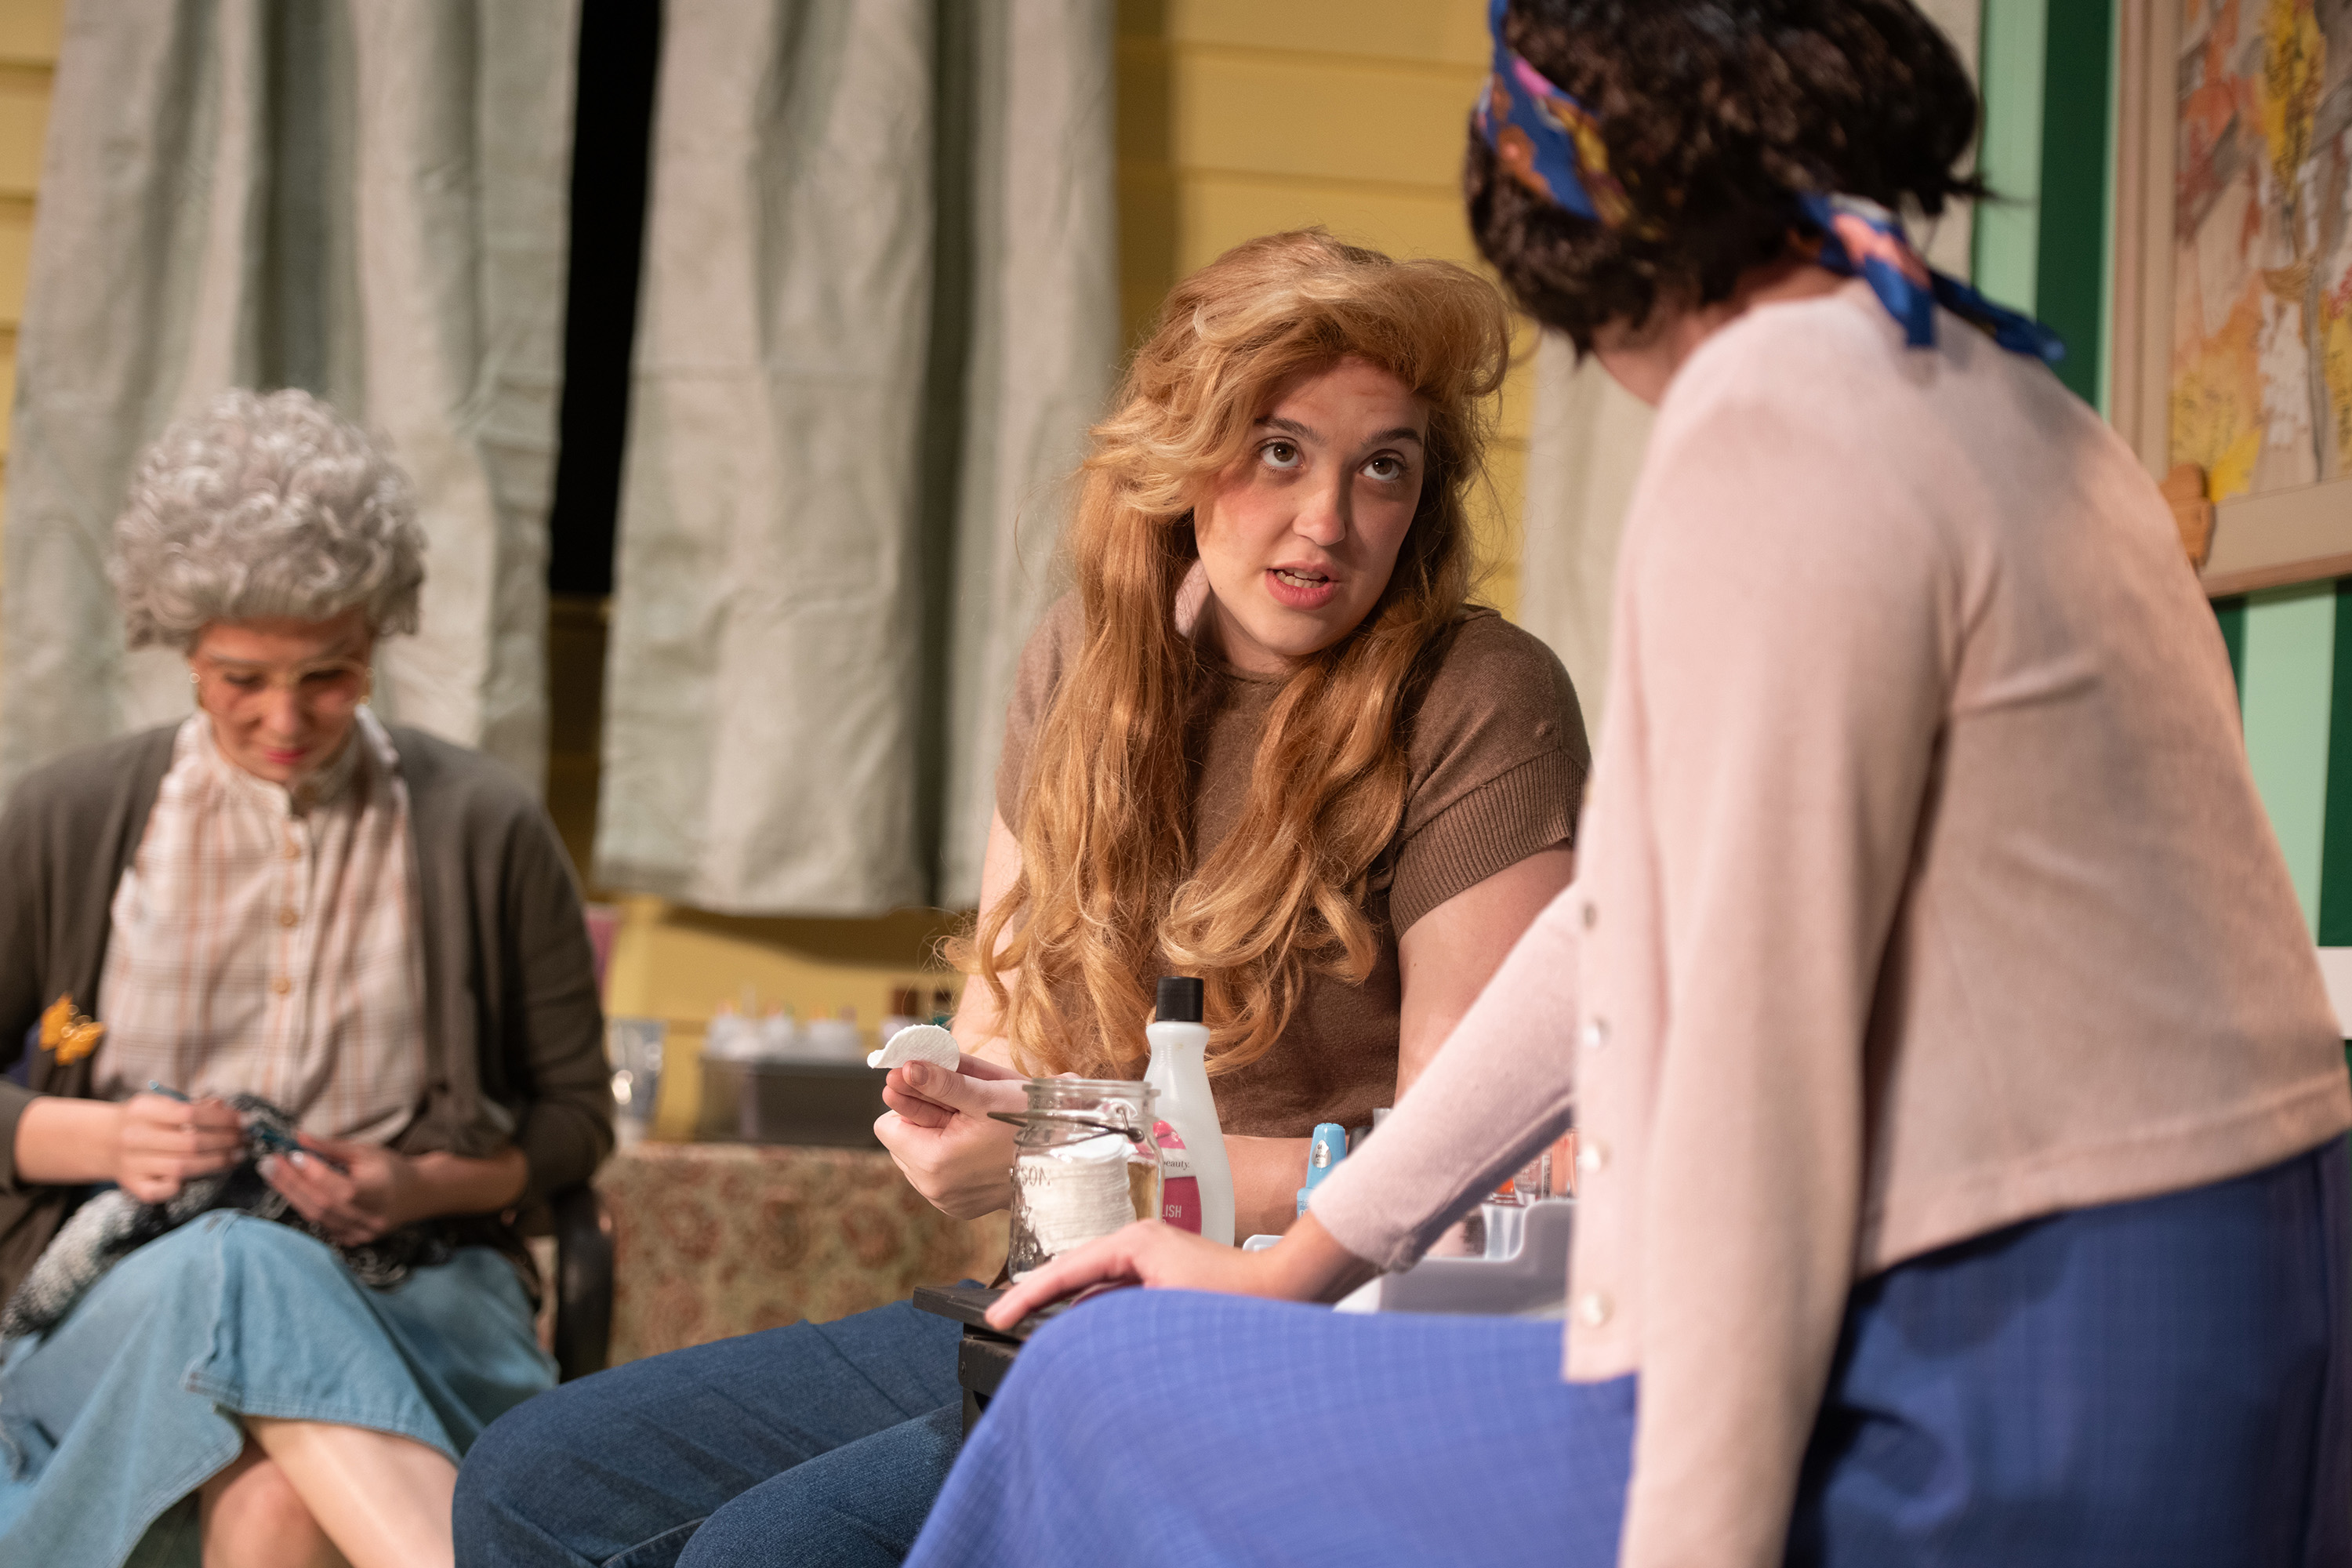 production photo from Hesston College Theatre fall 2023 show "Steel Magnolias"